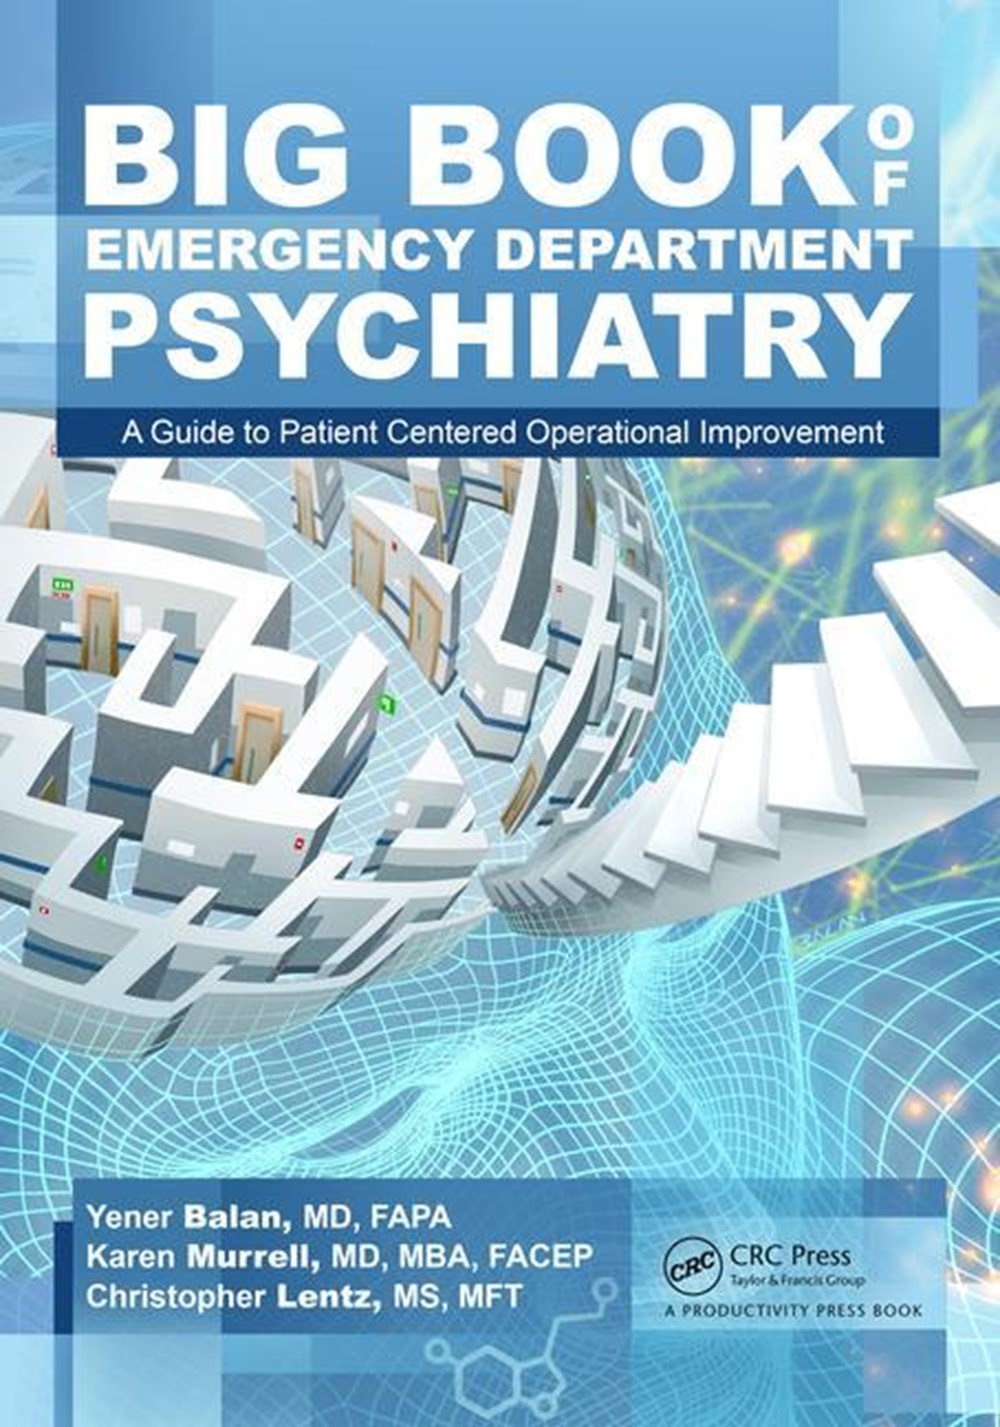 Big Book of Emergency Department Psychiatry A Guide to Patient Centered Operational Improvement